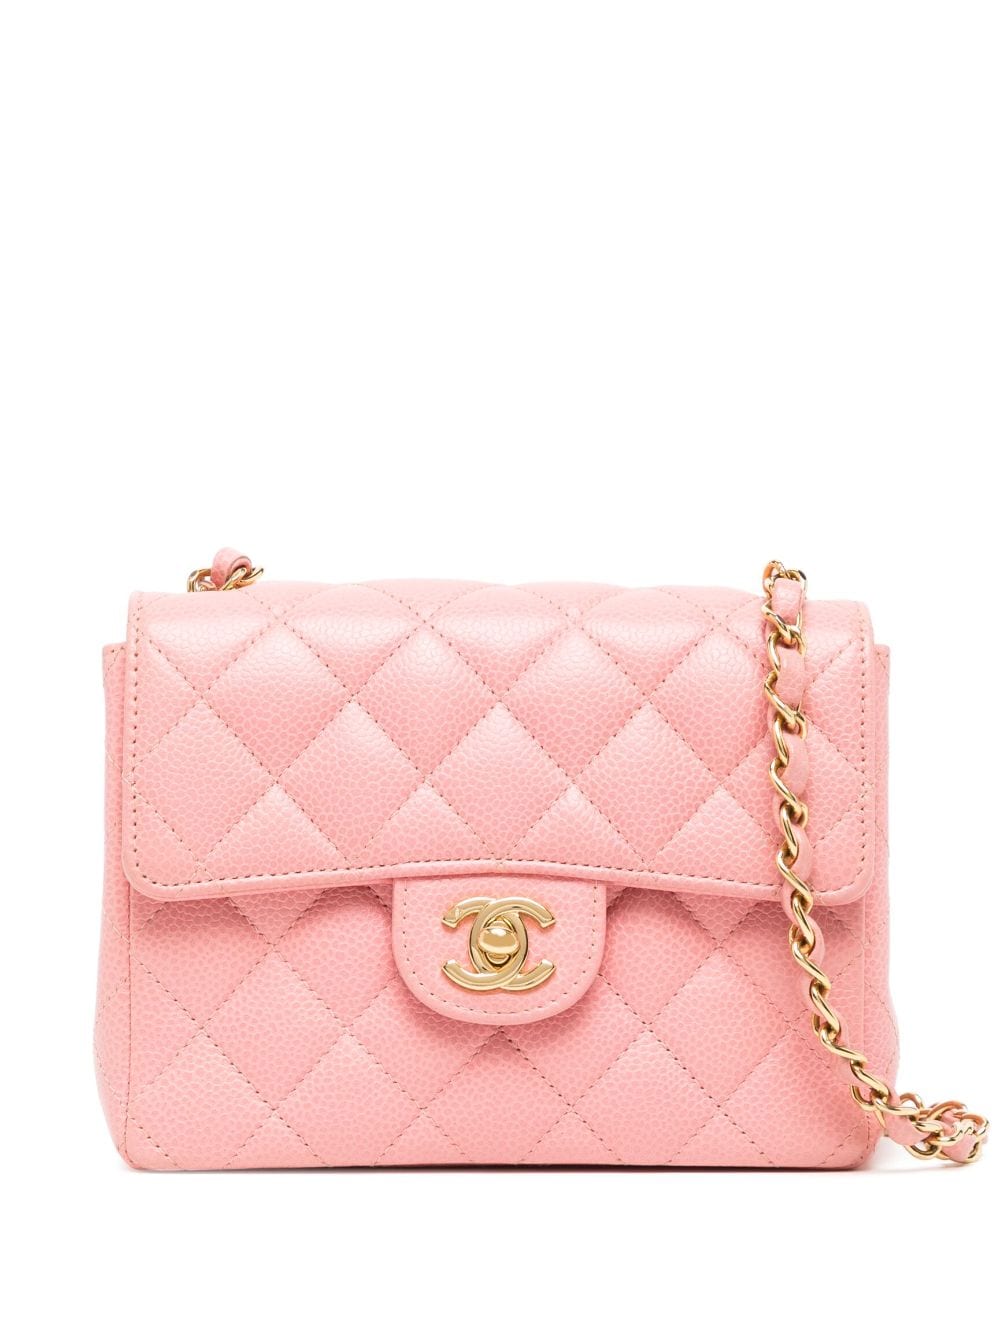 Pre-owned Chanel 2005 Mini Square Classic Flap Shoulder Bag In Pink